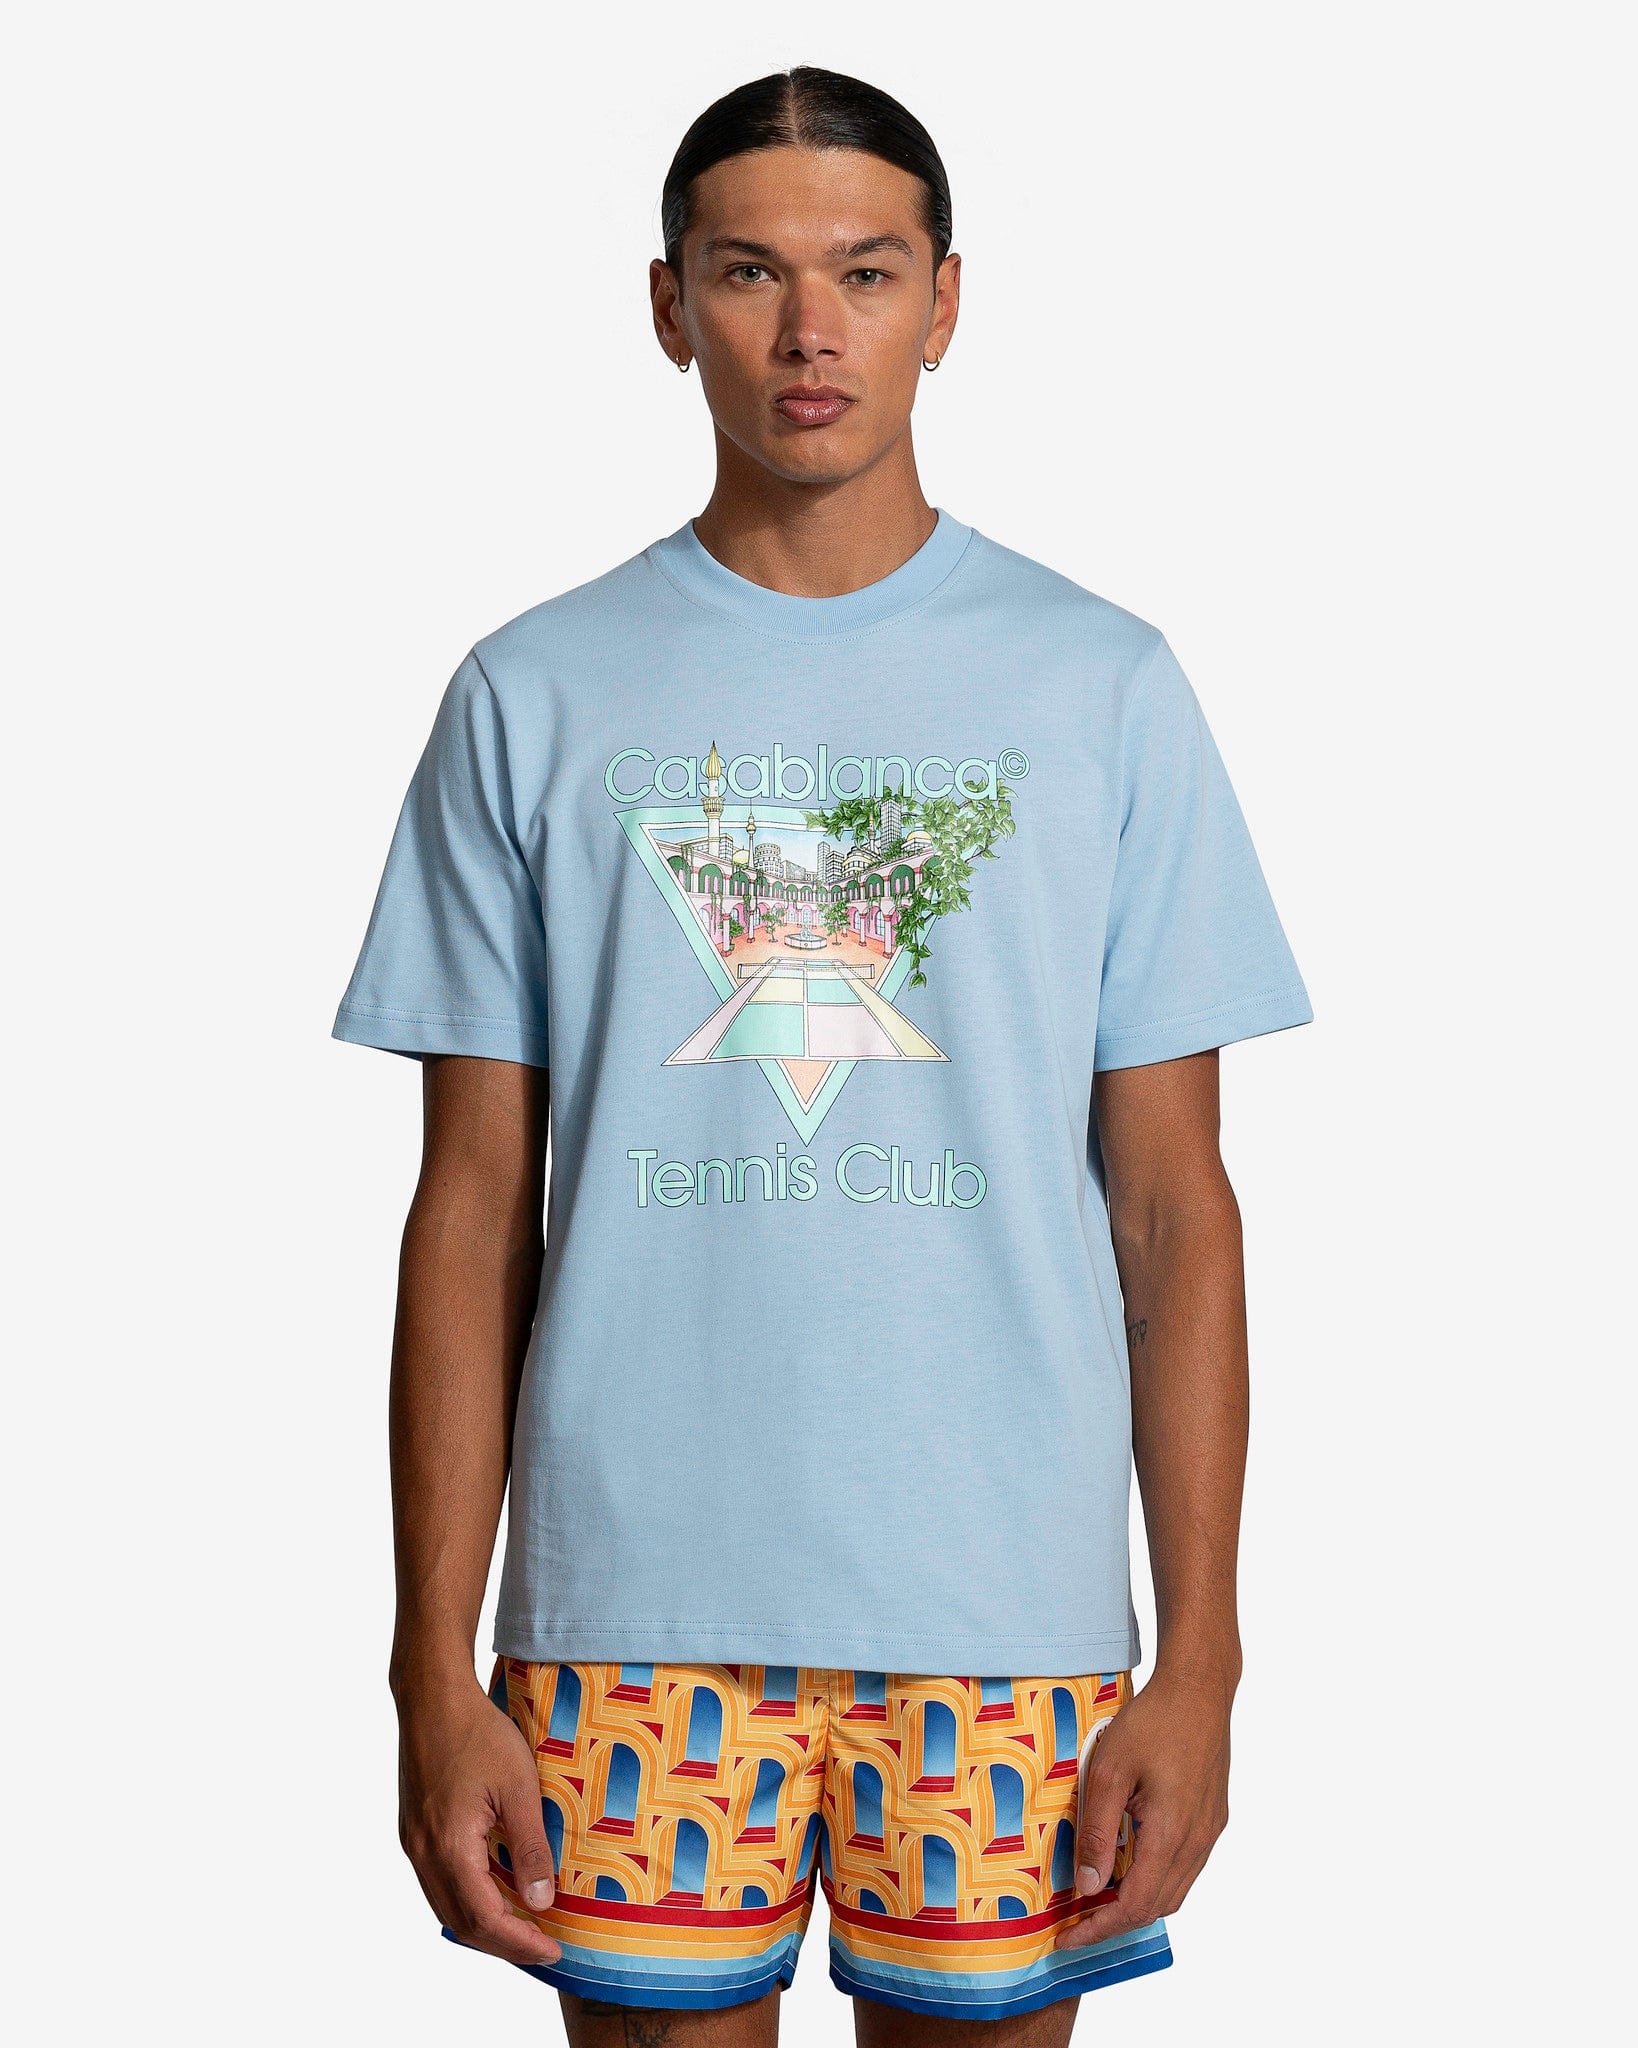 Tennis Club Pastelle Printed T-Shirt in Pale Blue